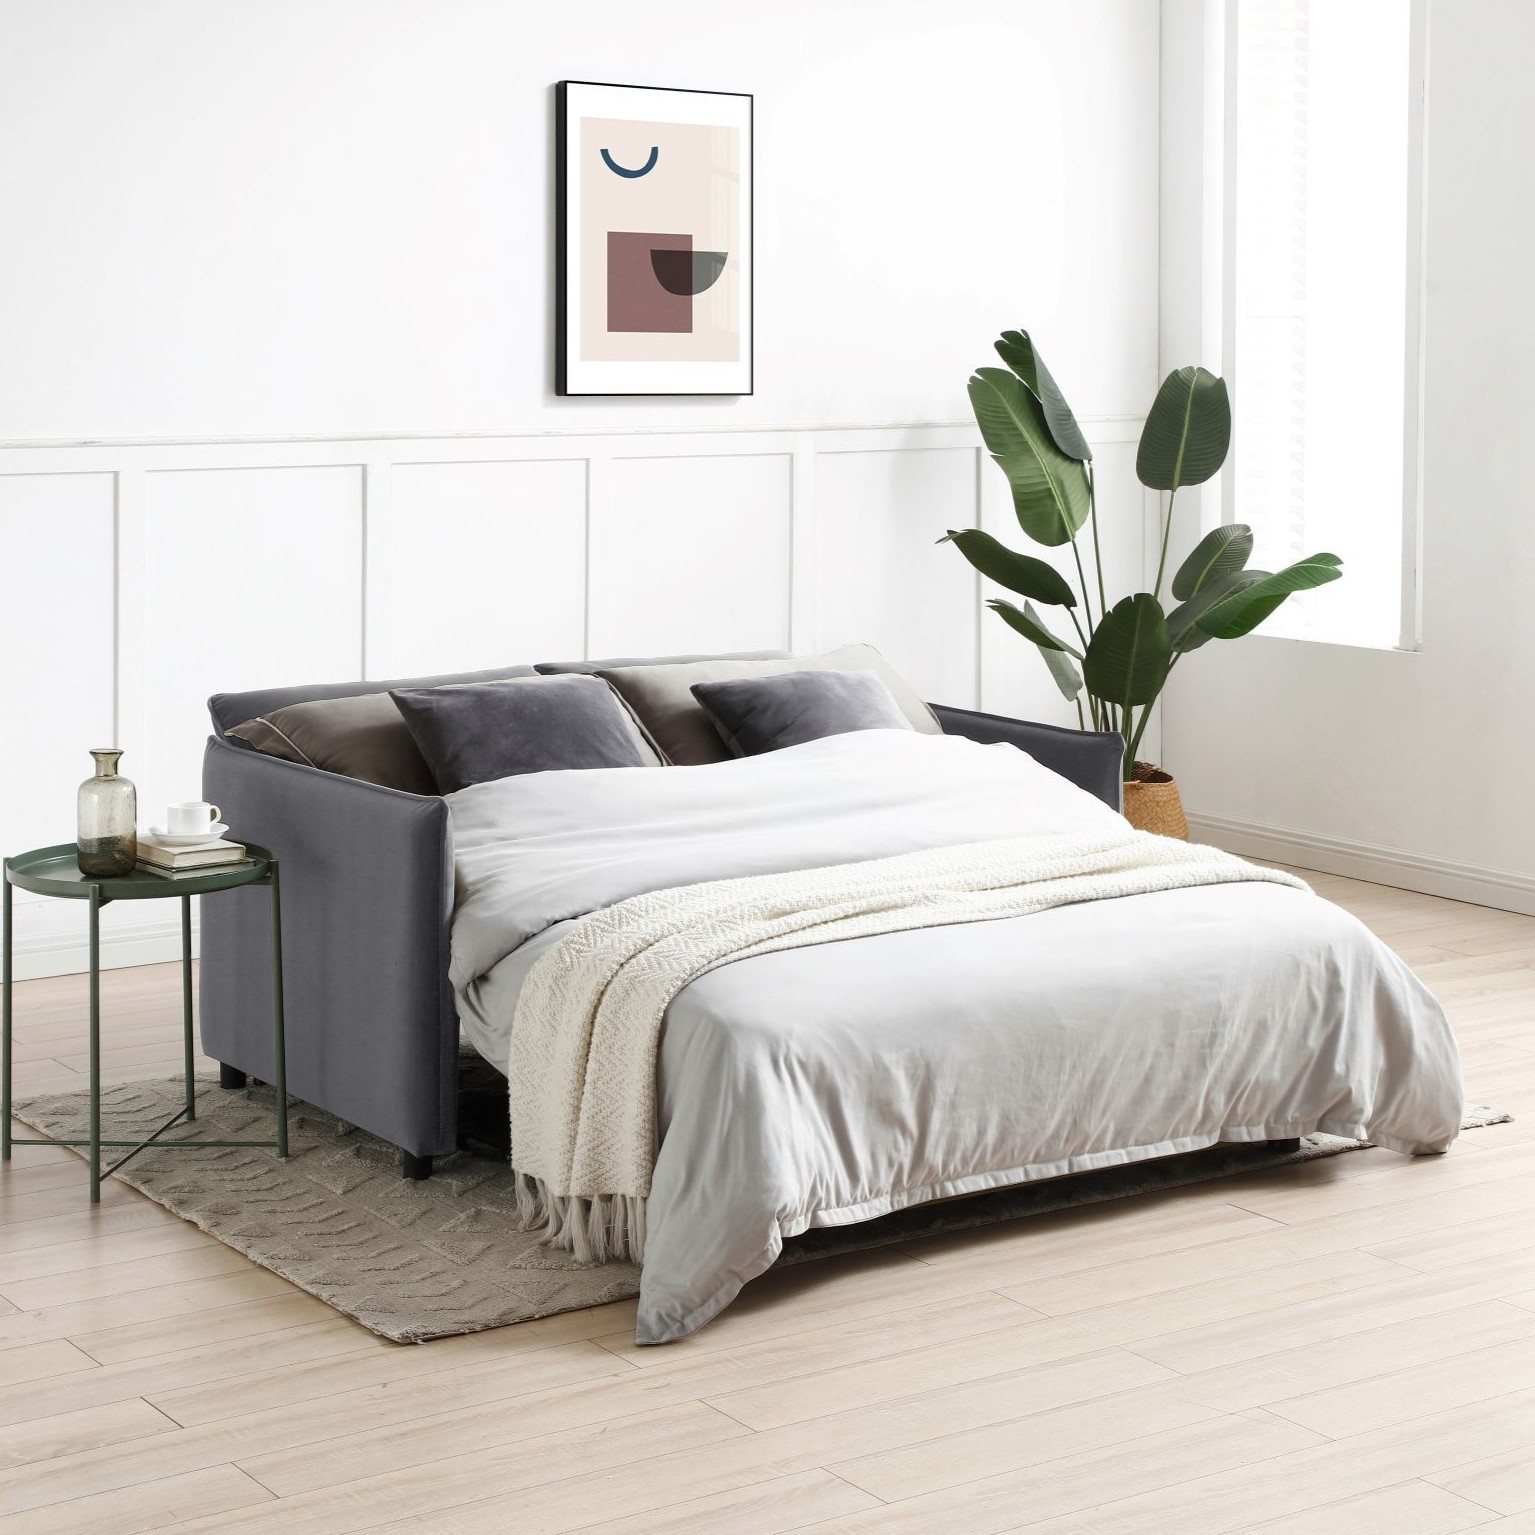 Where To Buy A Sofa Bed